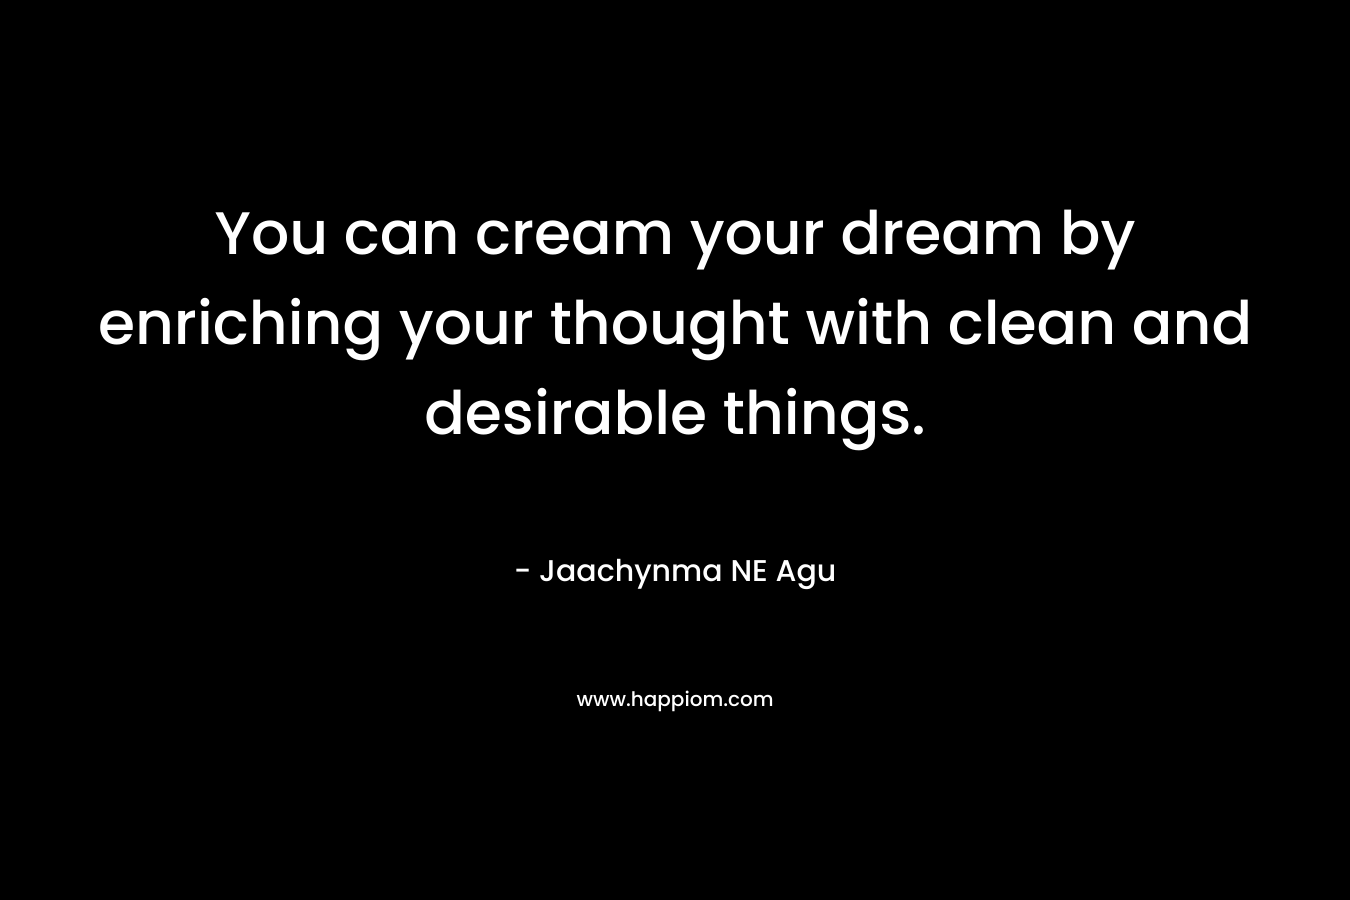 You can cream your dream by enriching your thought with clean and desirable things.